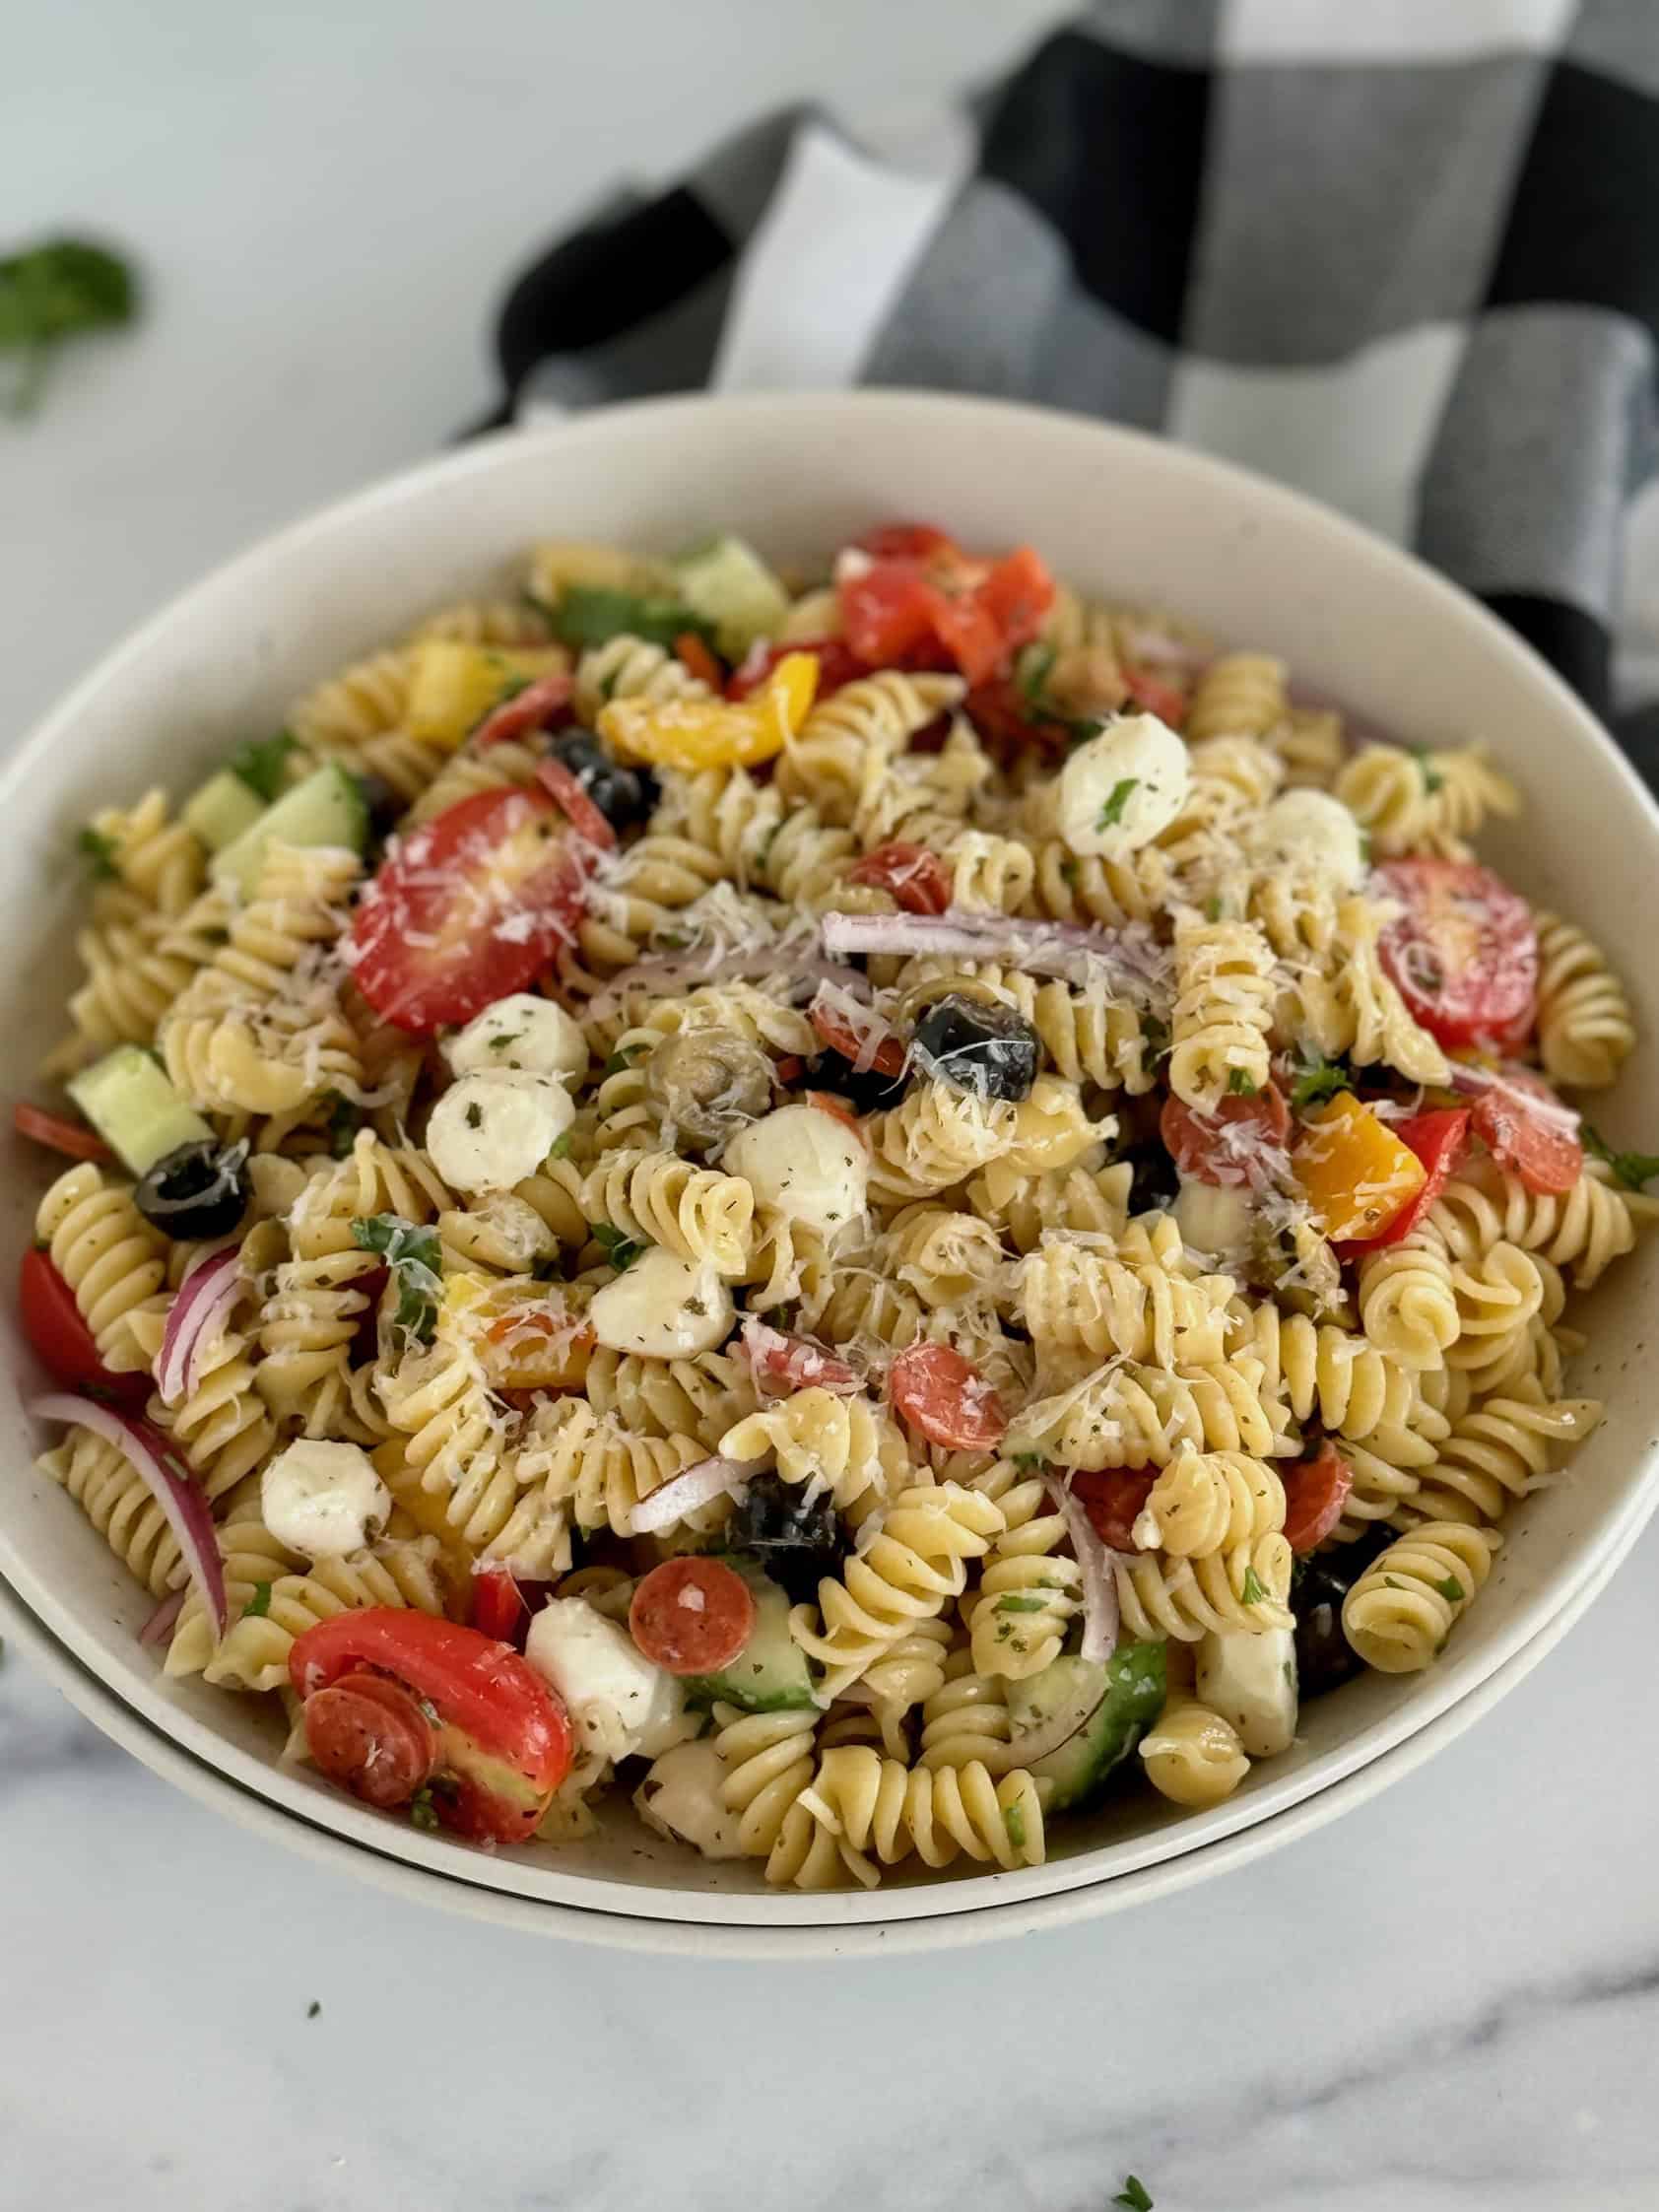 An overhead shot of a bowl featuring rotini pasta, cherry tomatoes, bell peppers, black olives, cucumber, red onion, and mozzarella cheese balls, served with a black and white checkered napkin.